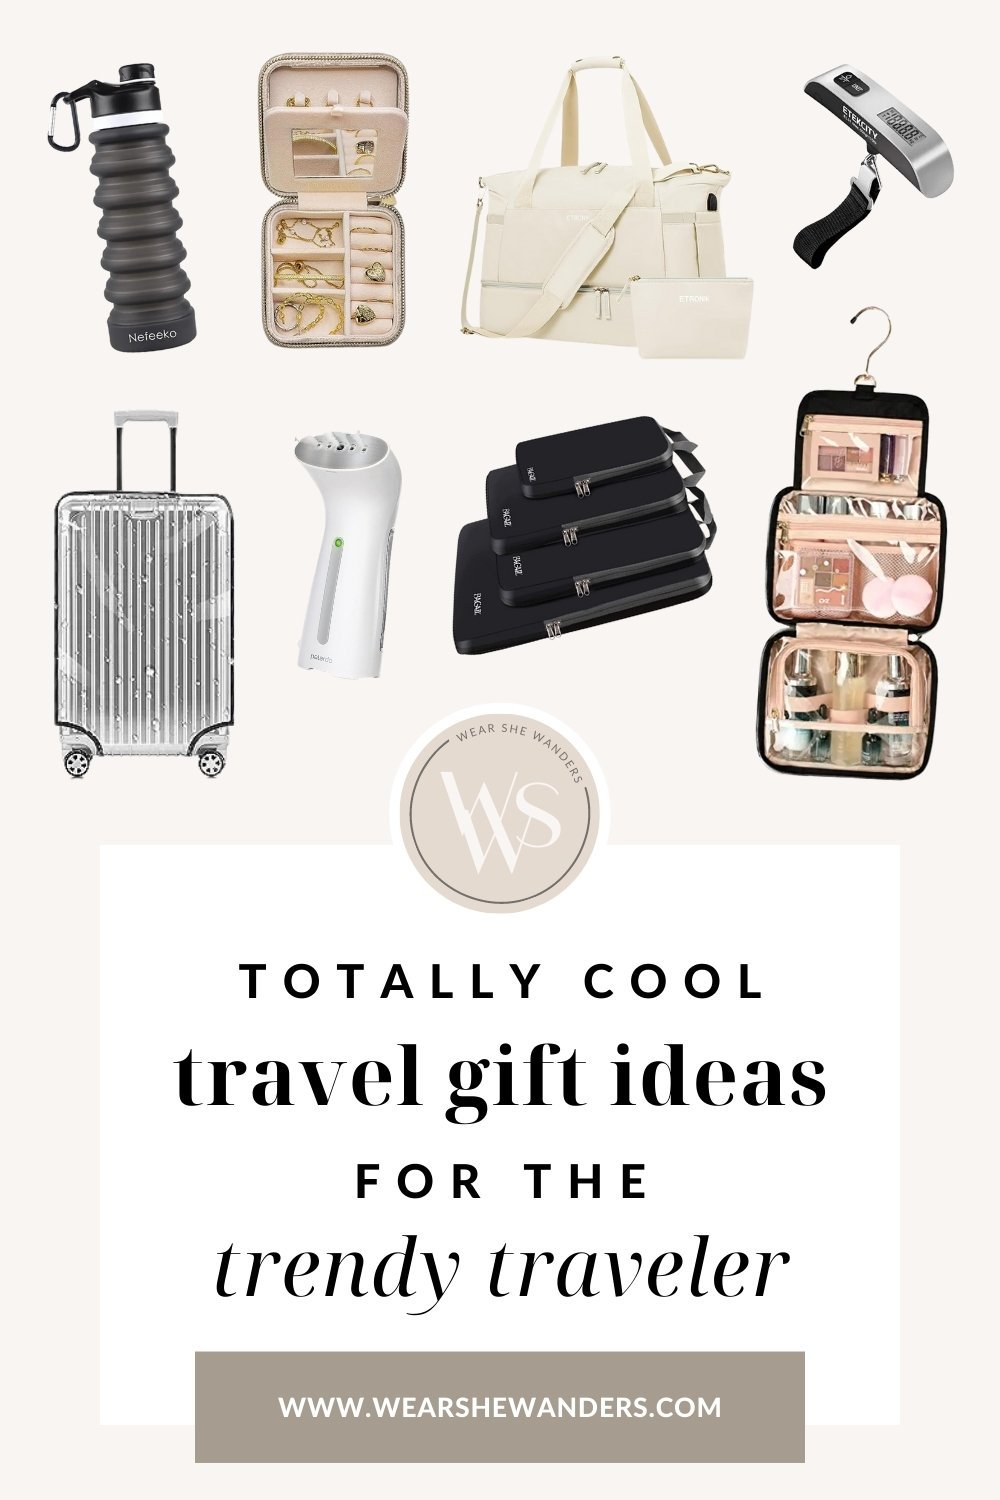 Gift Ideas: Travel Gift Ideas for Her - Arzo Travels